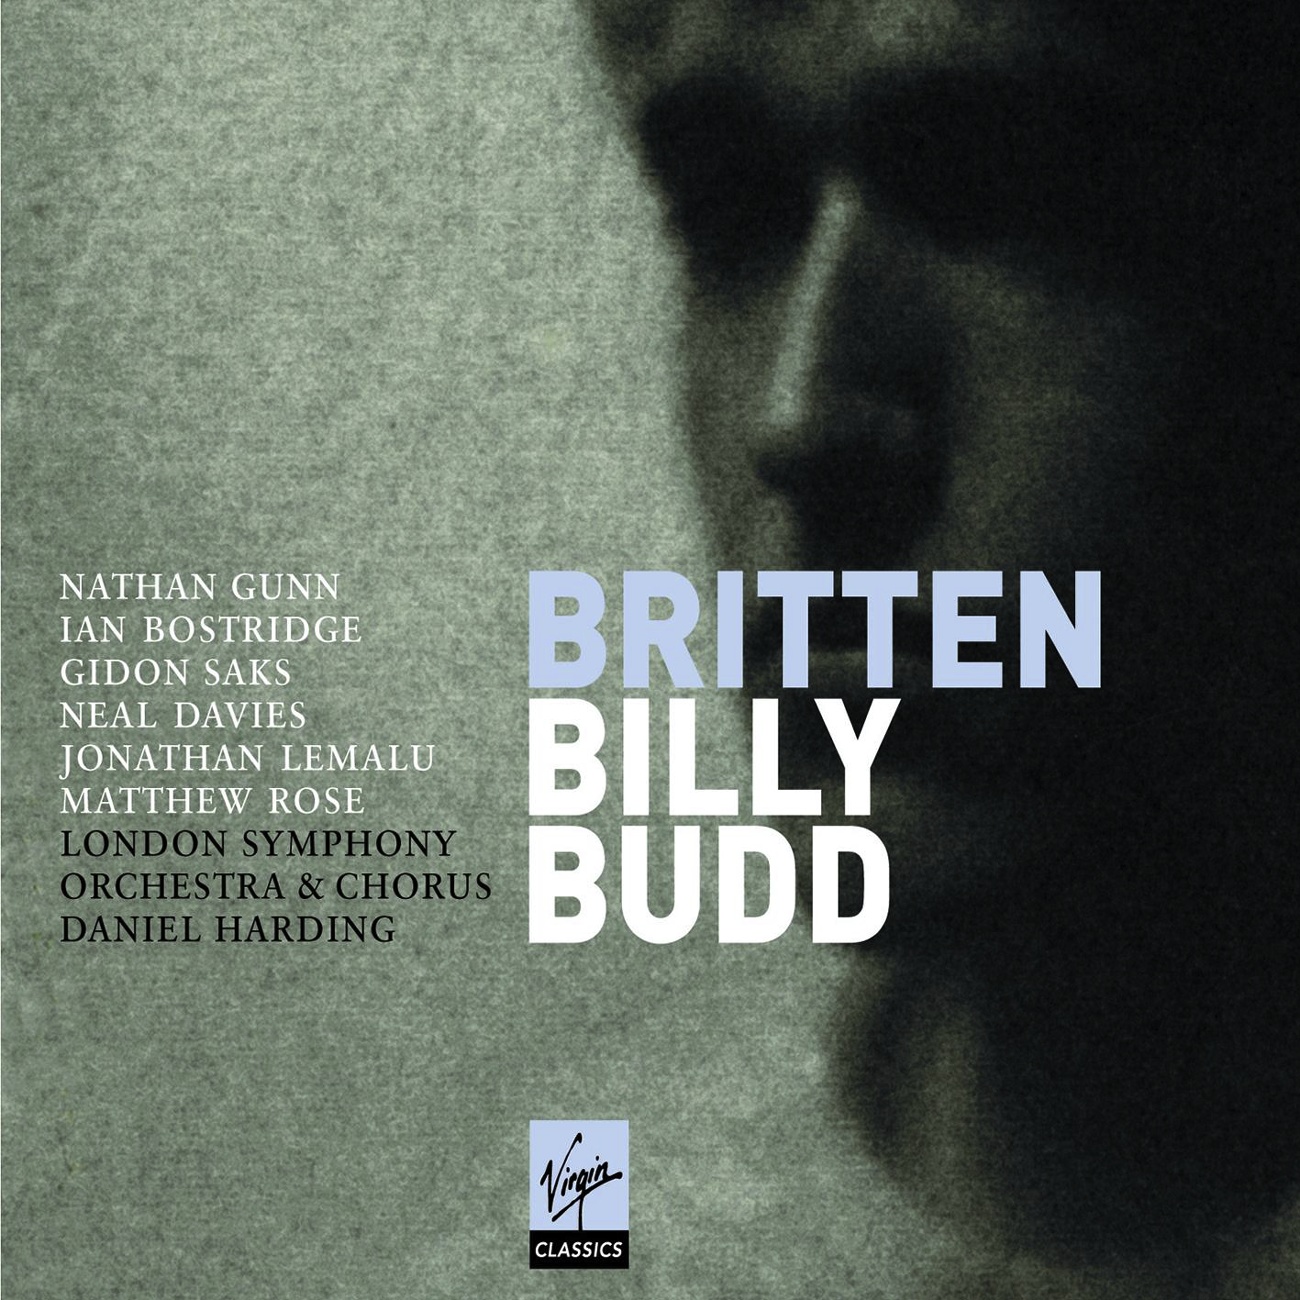 Billy Budd: Gentlemen, William Budd here has killed the Master-at-arms (Vere/First Lieutenant/Sailing Master/Ratcliffe)